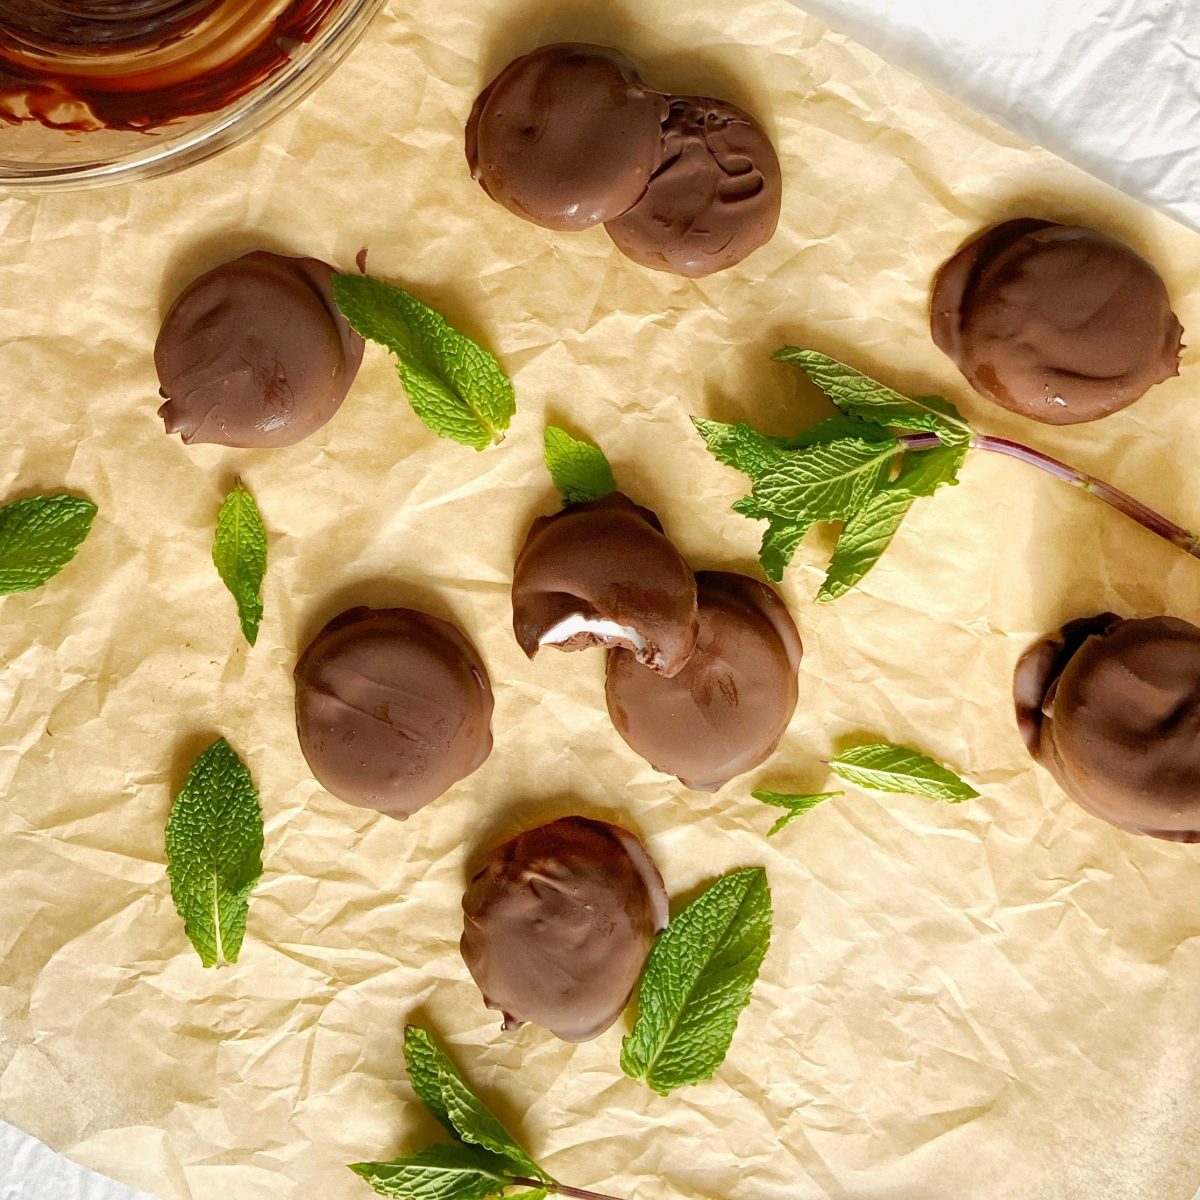 Peppermint patties and fresh mint leaves spread out over parchment paper.